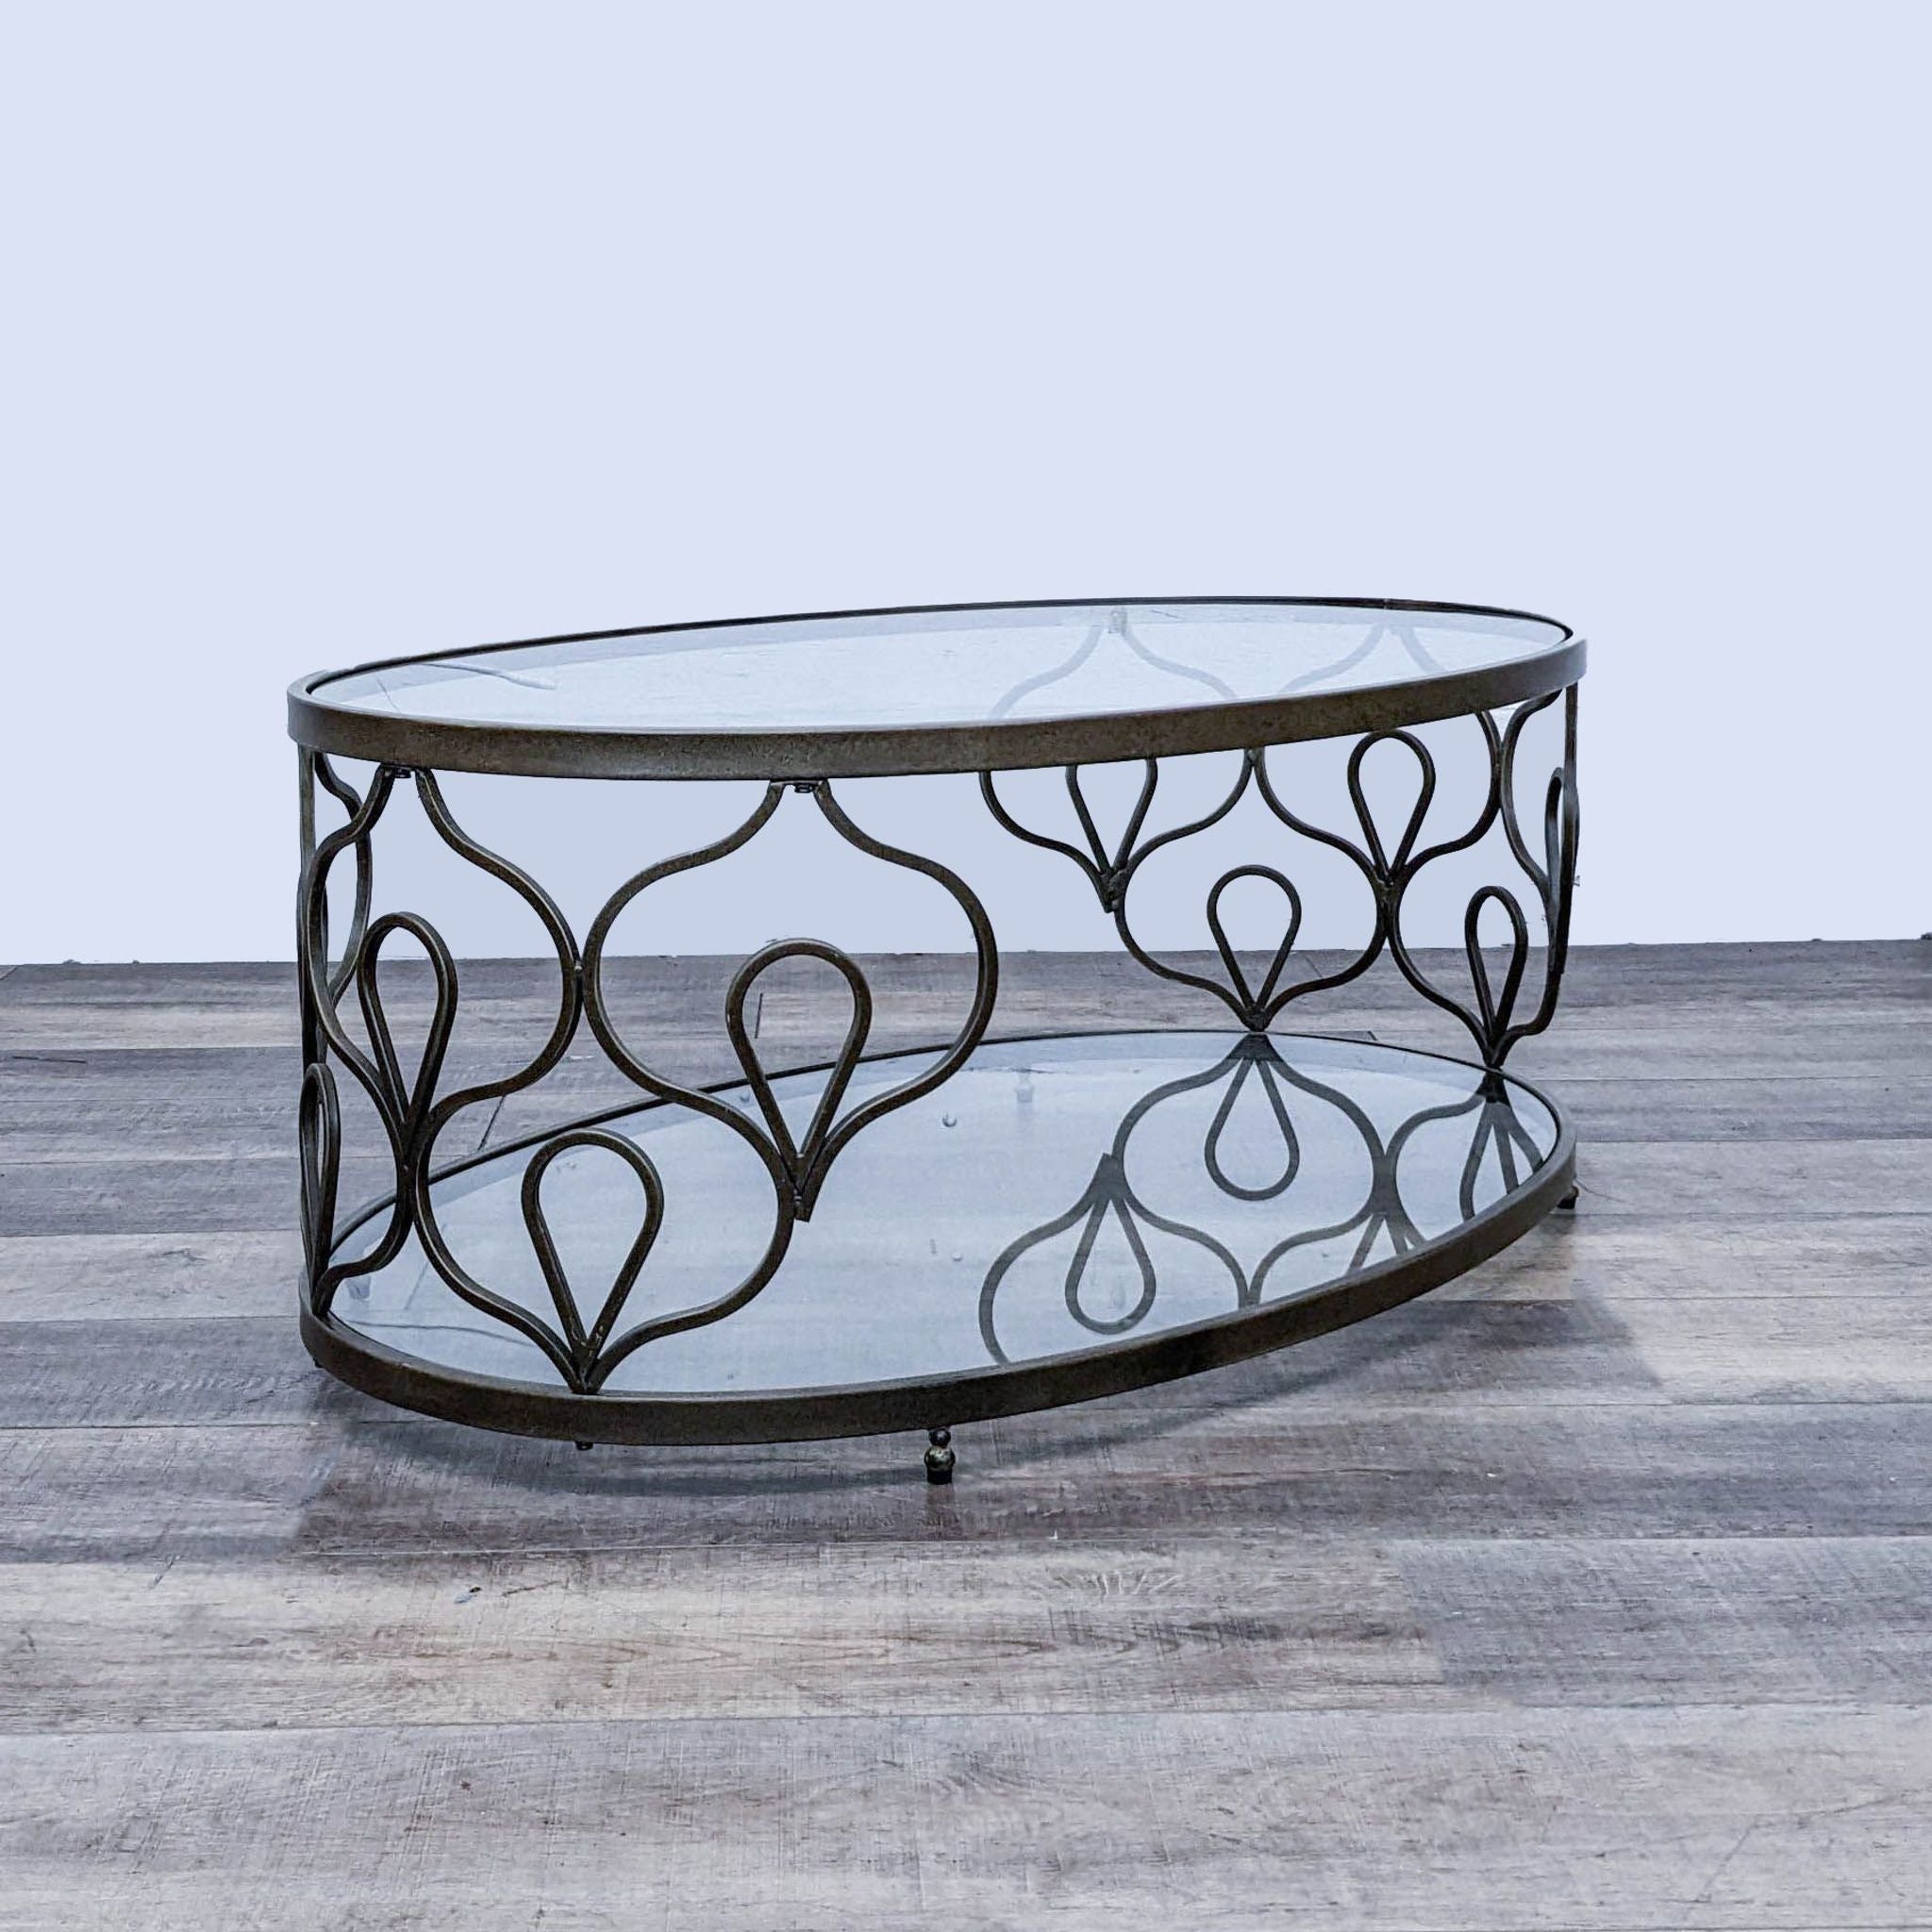 2. Elegant Reperch coffee table featuring a glass top and ornamental metal framework, set on a wood-textured surface.